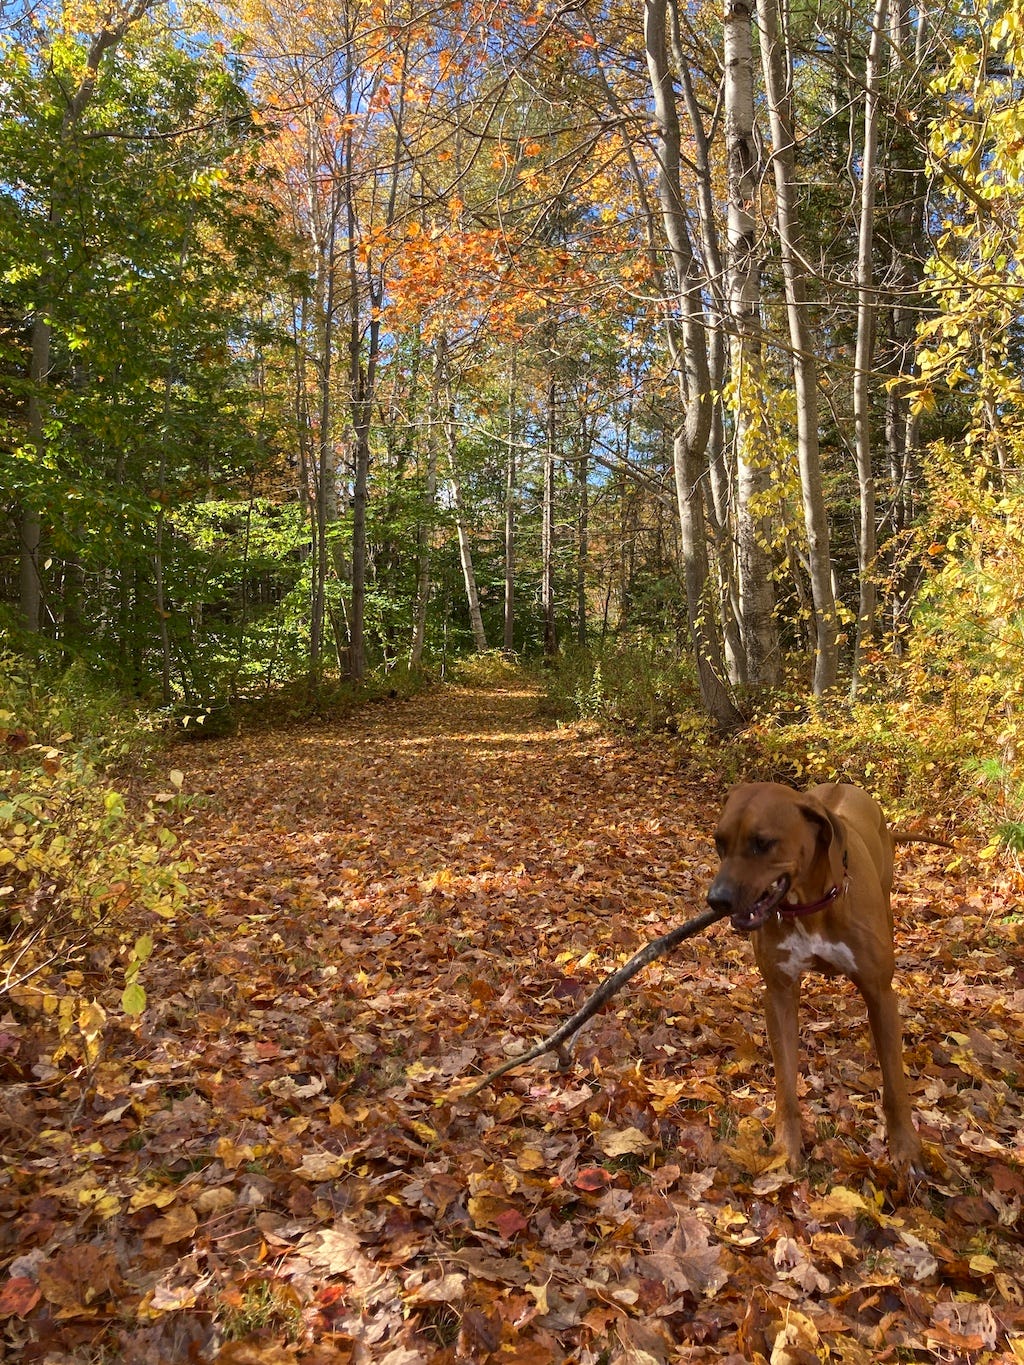 Sammy the Today in Tabs emotional-support ridgeback chews on a stick in the foreground of a ridiculously fall-leaf-strewn path in the woods. The beech leaves are still green for some reason but the maple and birch are almost all on the ground already, so the thick surrounding woods are an absolute fall festival of green, brown, red, yellow, and orange, all dappled with the kind of especially clear sunlight you only get on a crisp fall day after a couple days of soaking rain. 